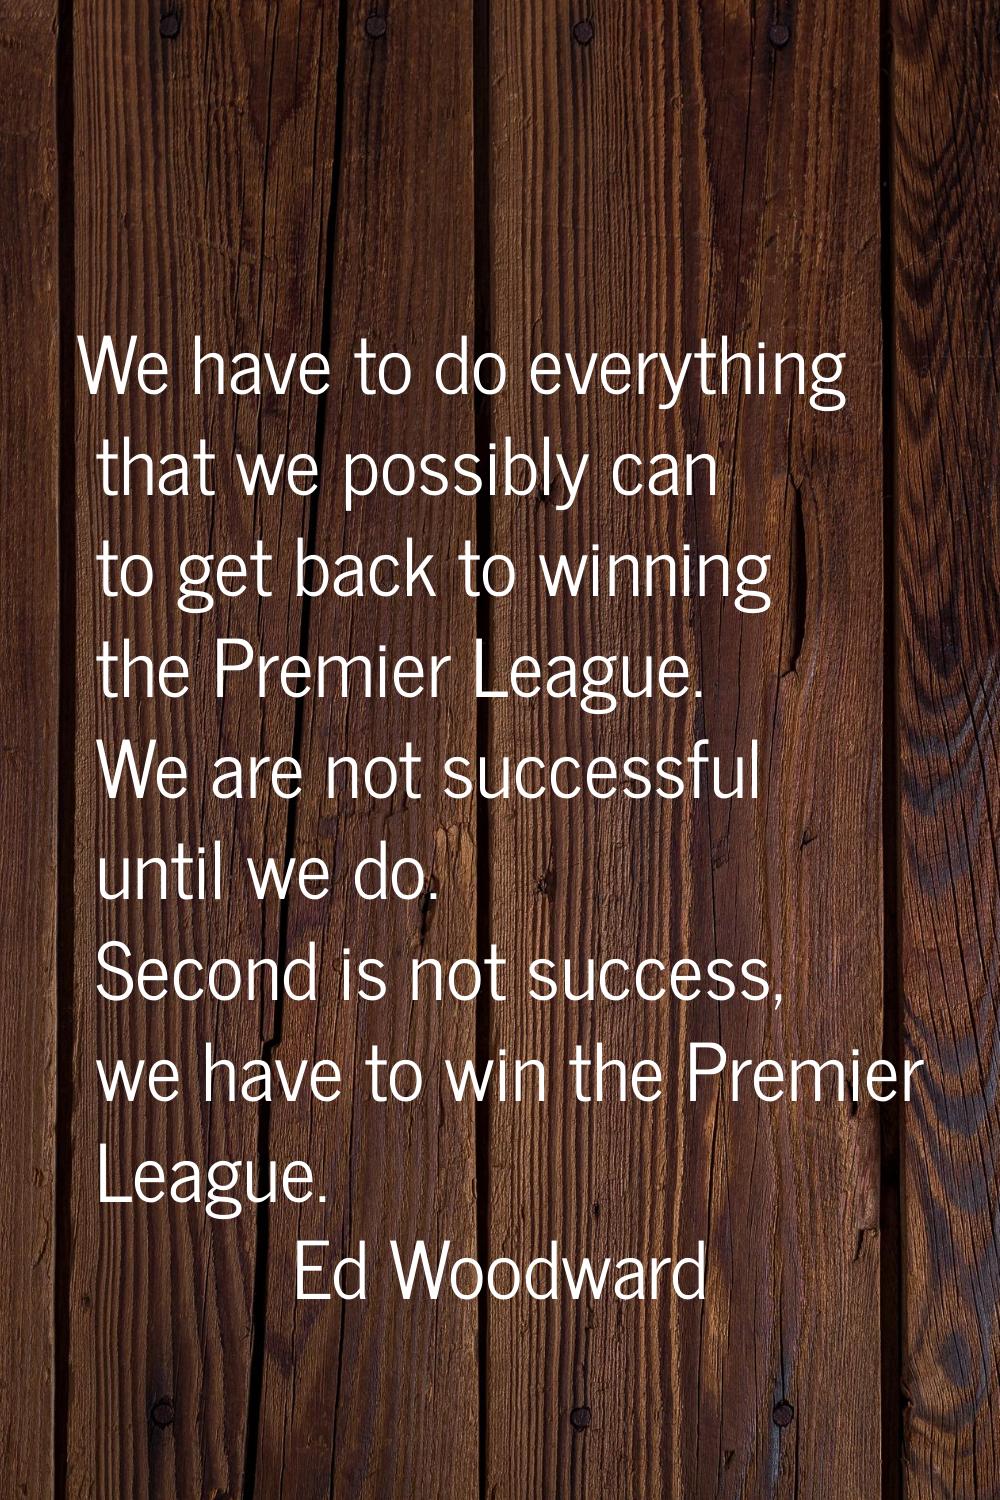 We have to do everything that we possibly can to get back to winning the Premier League. We are not